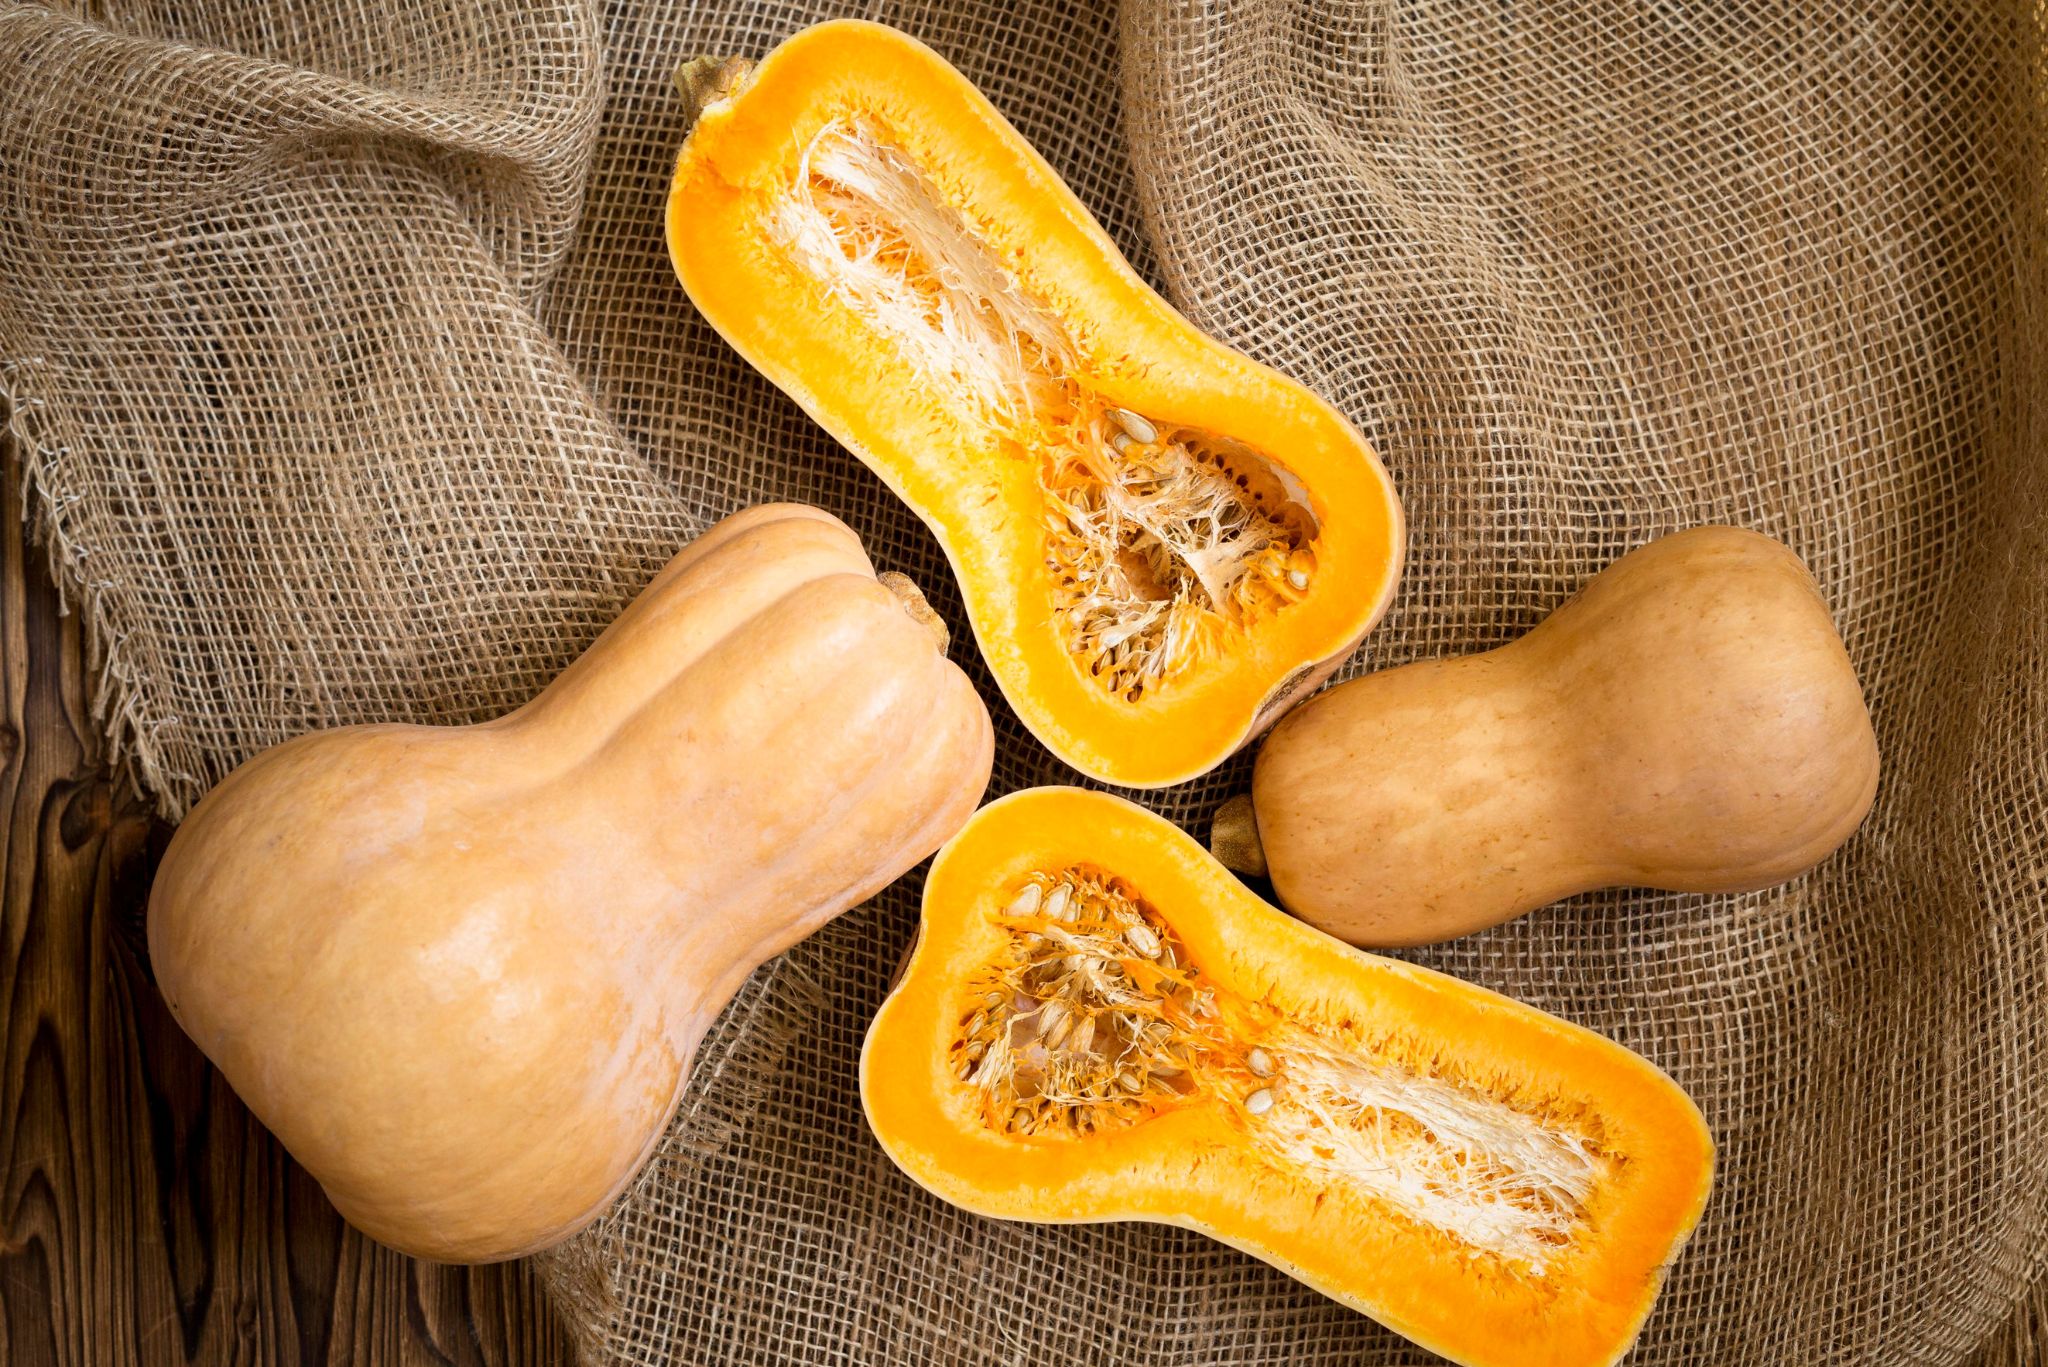 Harvested Honeynut squash on a table